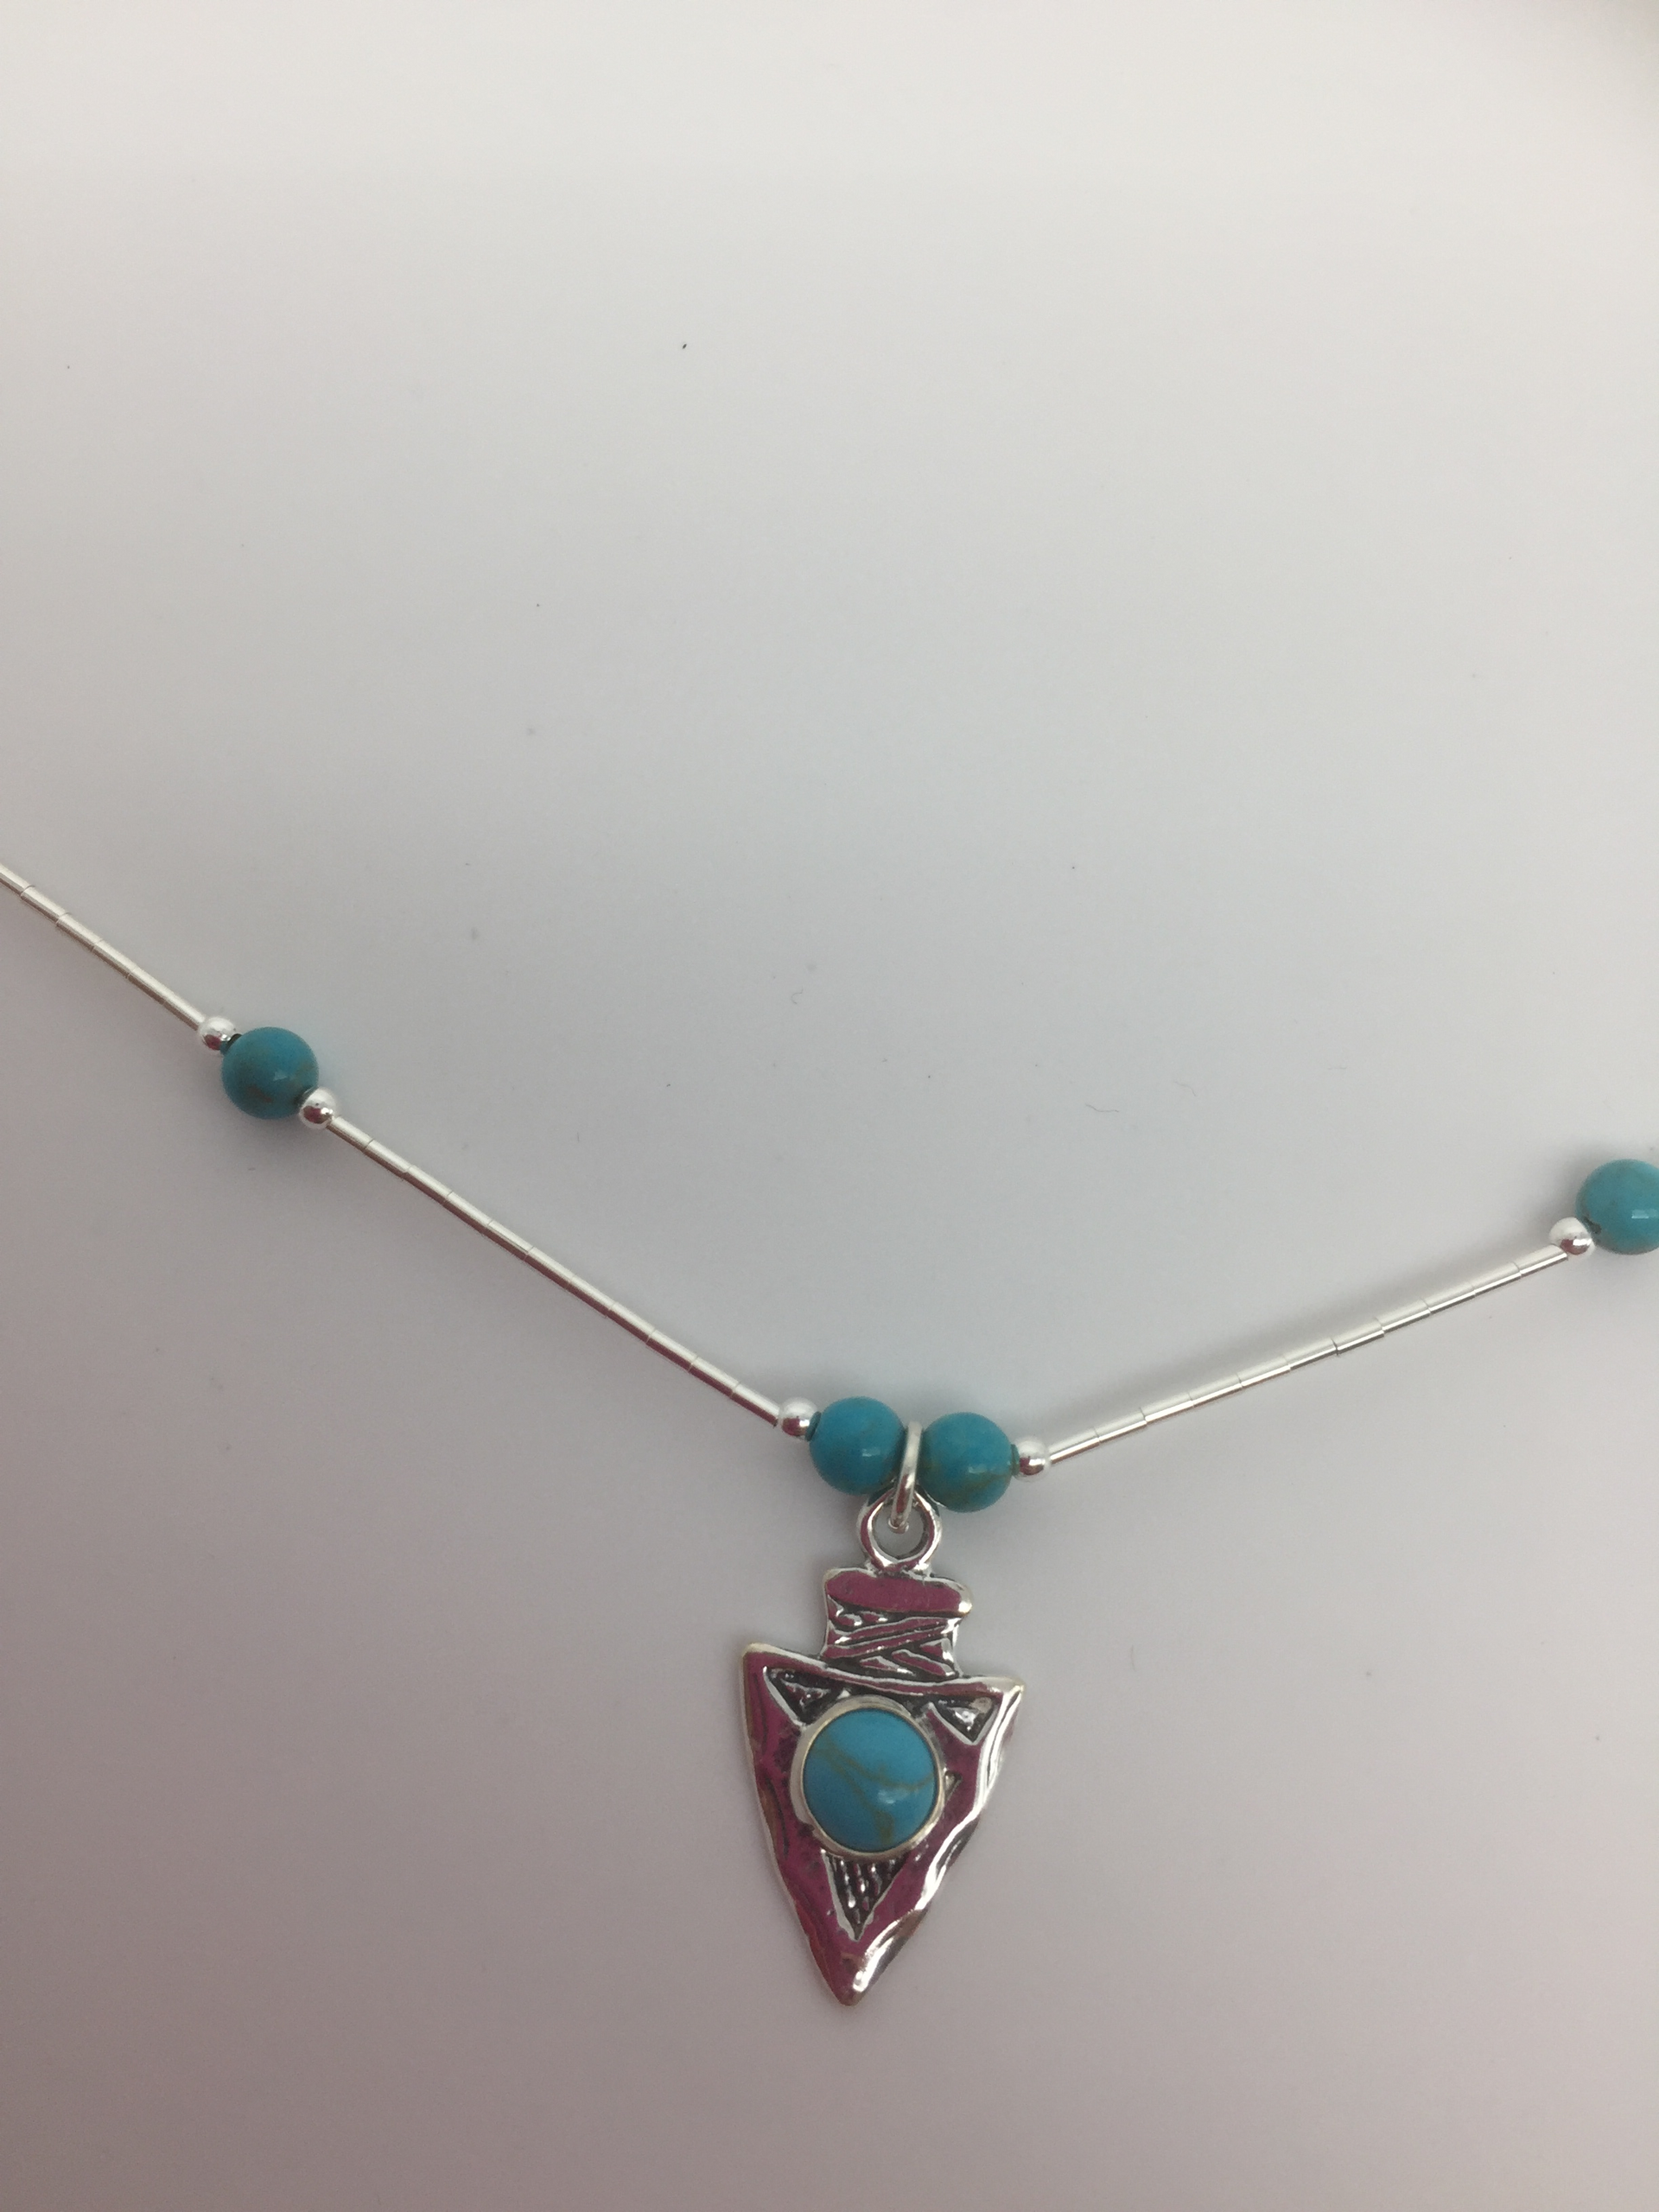 Turquoise Chain/Pendant/Necklace